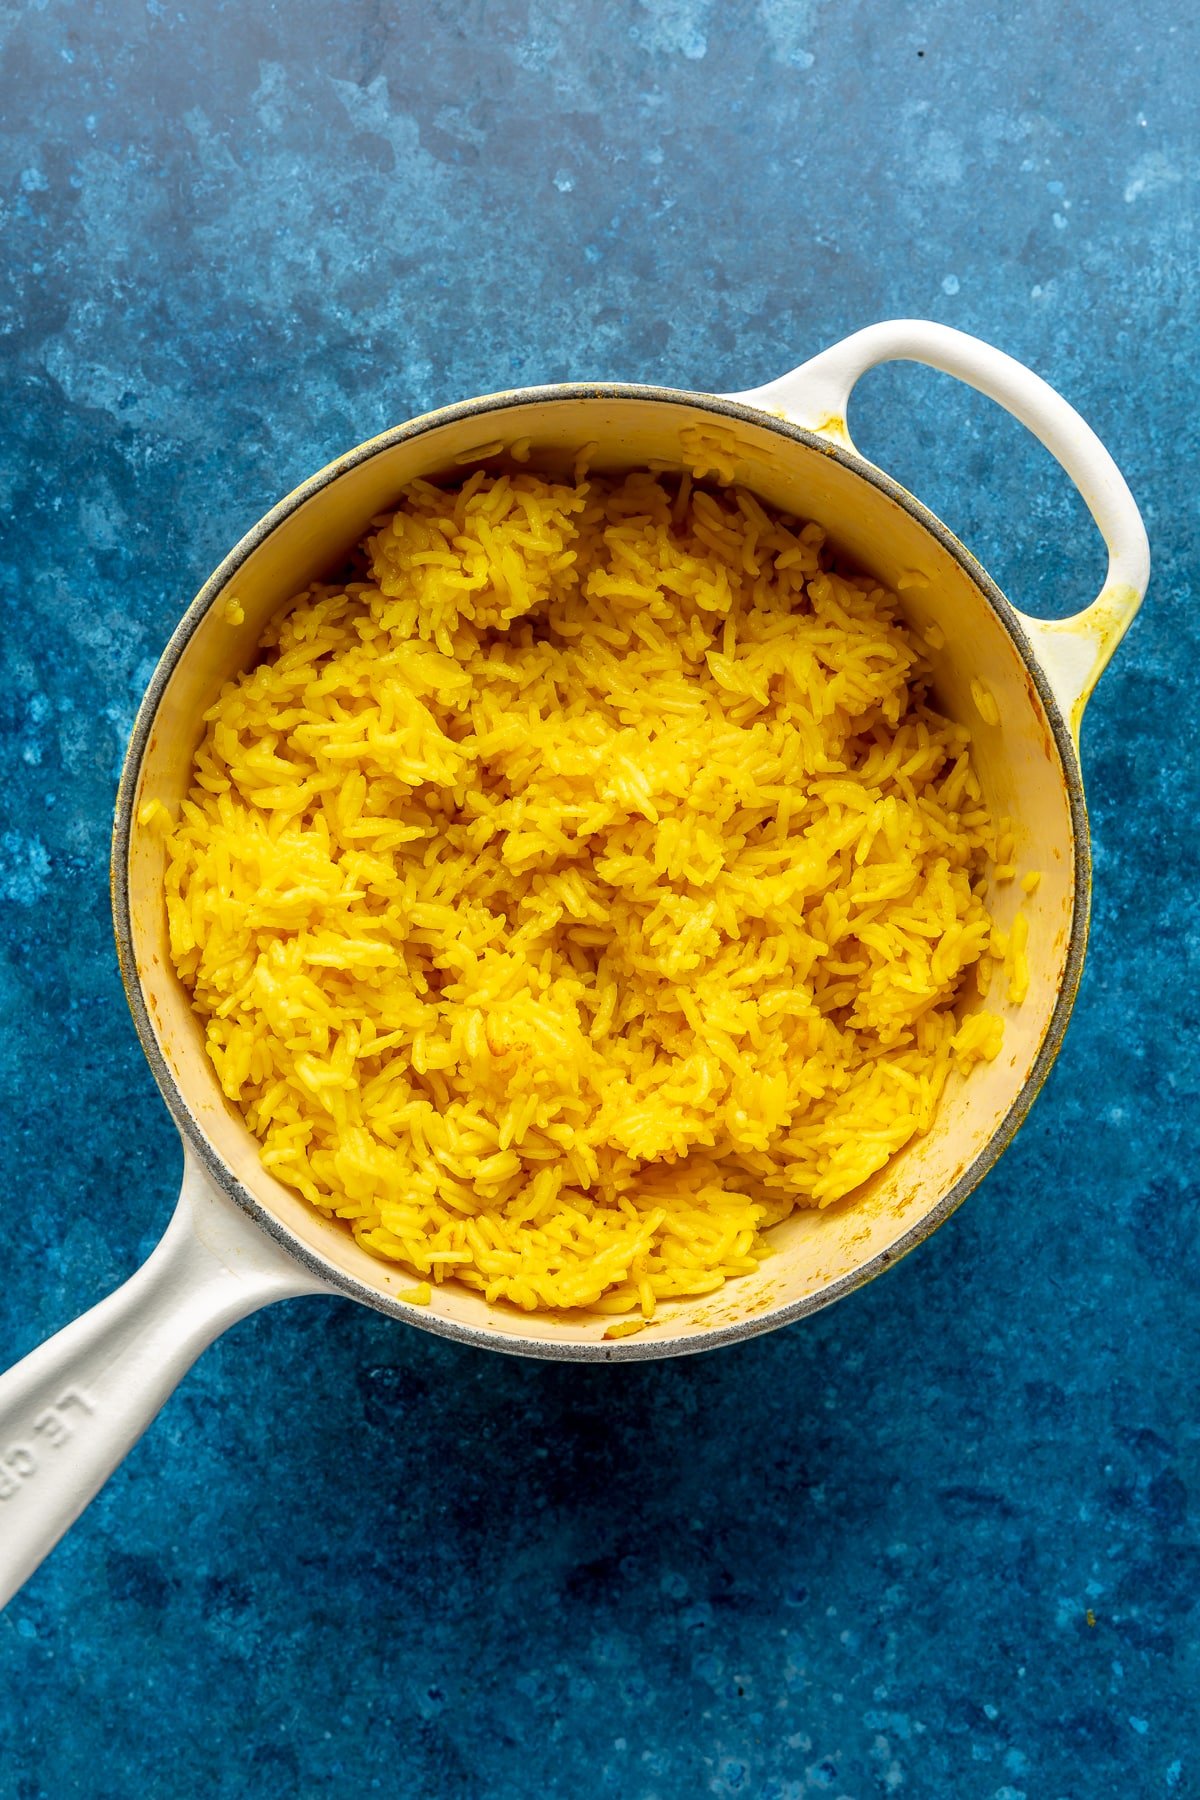 A cooked yellow colored rice sits in a white enameled pot.